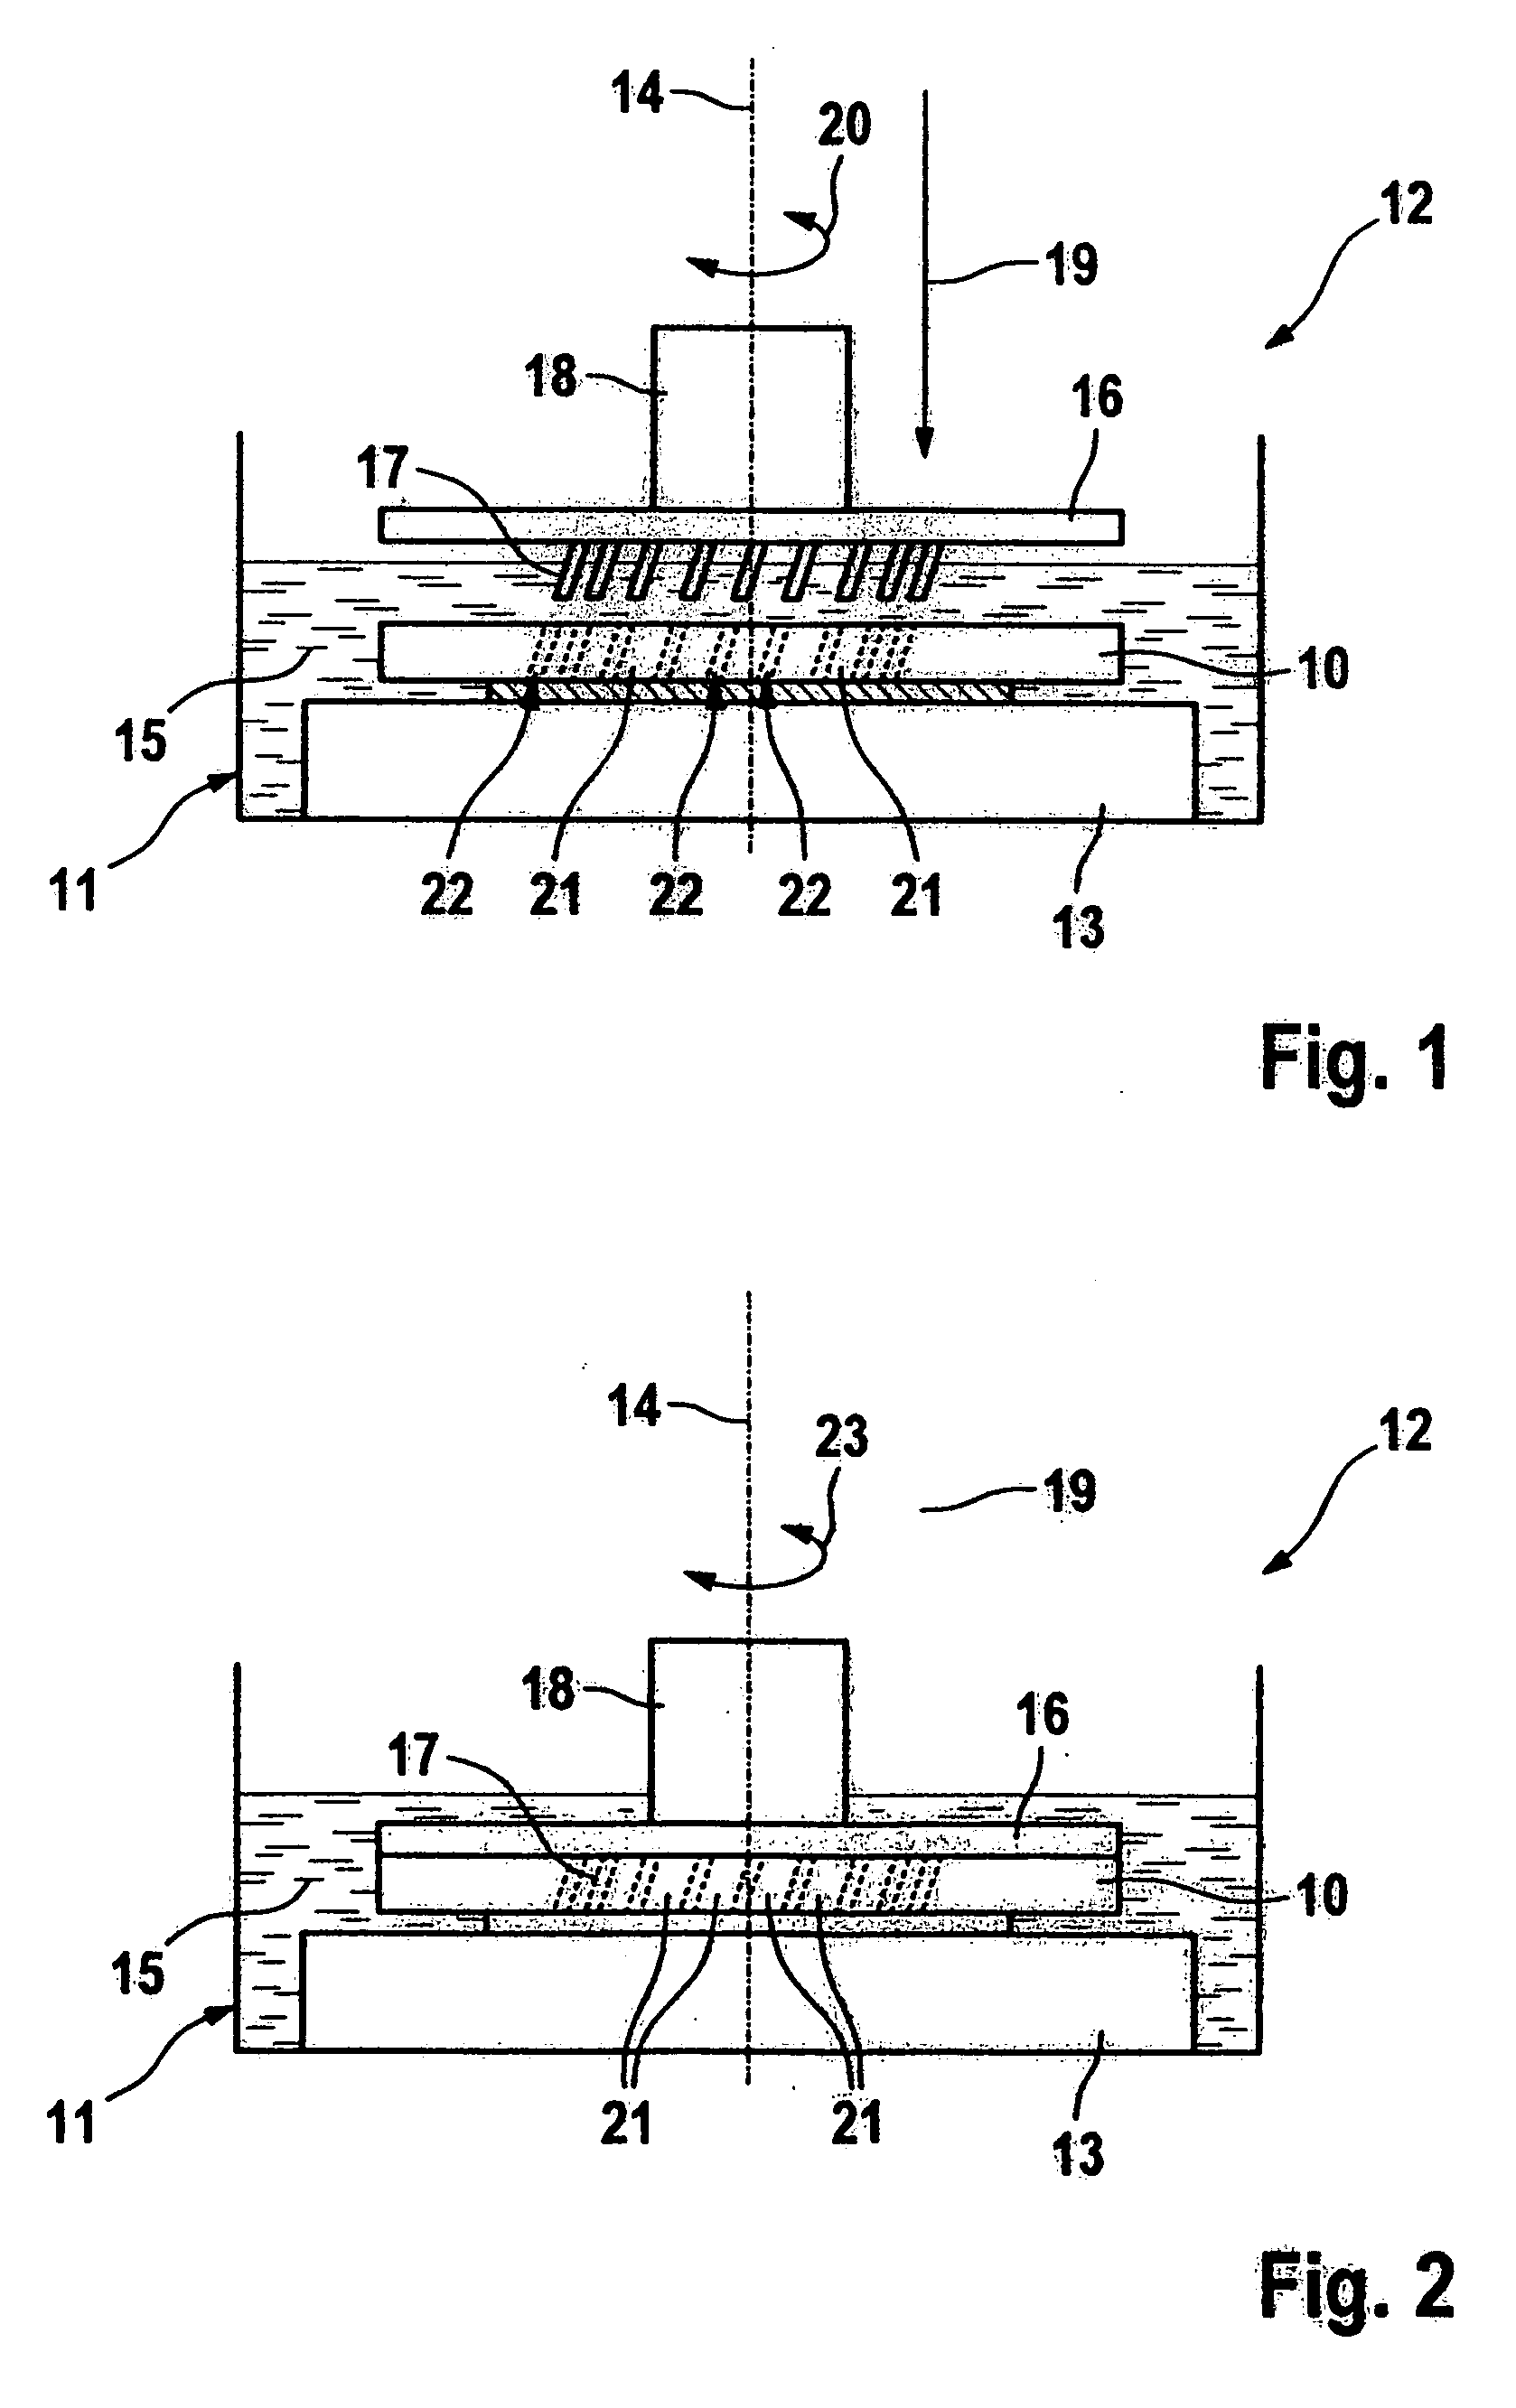 Method and device for manufacturing integrally bladed rotors